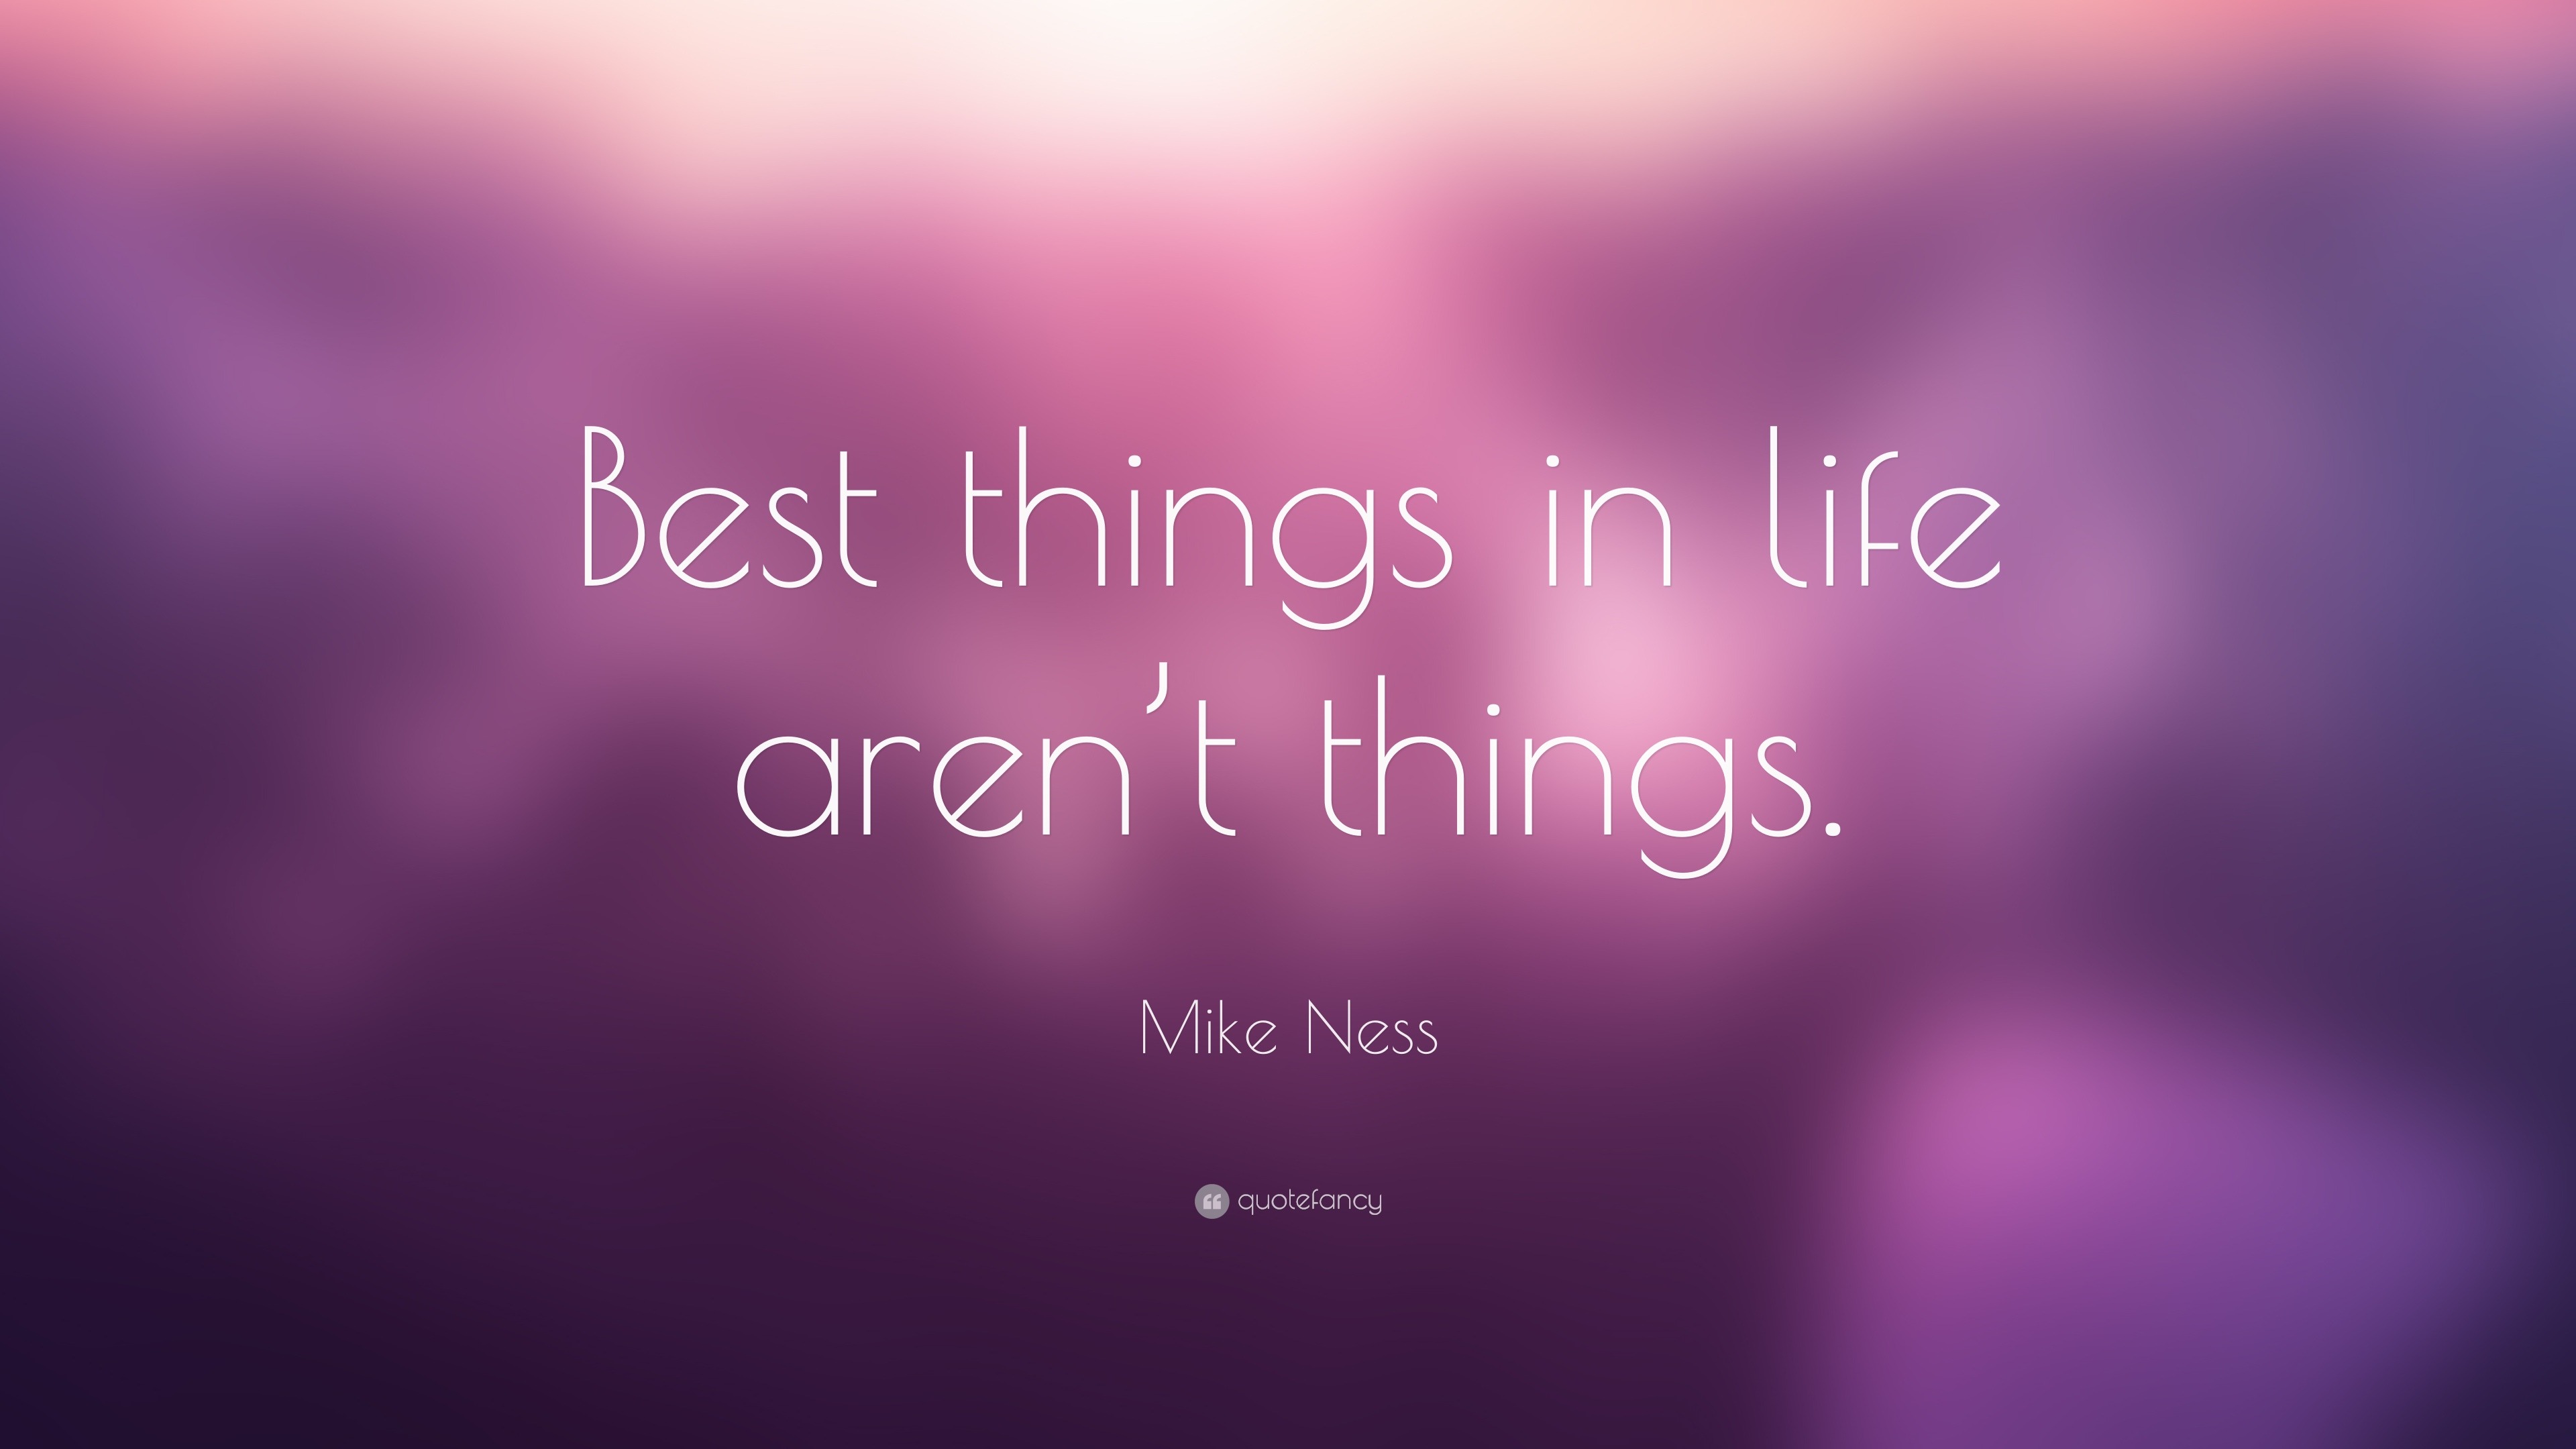 Mike Ness Quote “Best things in life aren t things ”